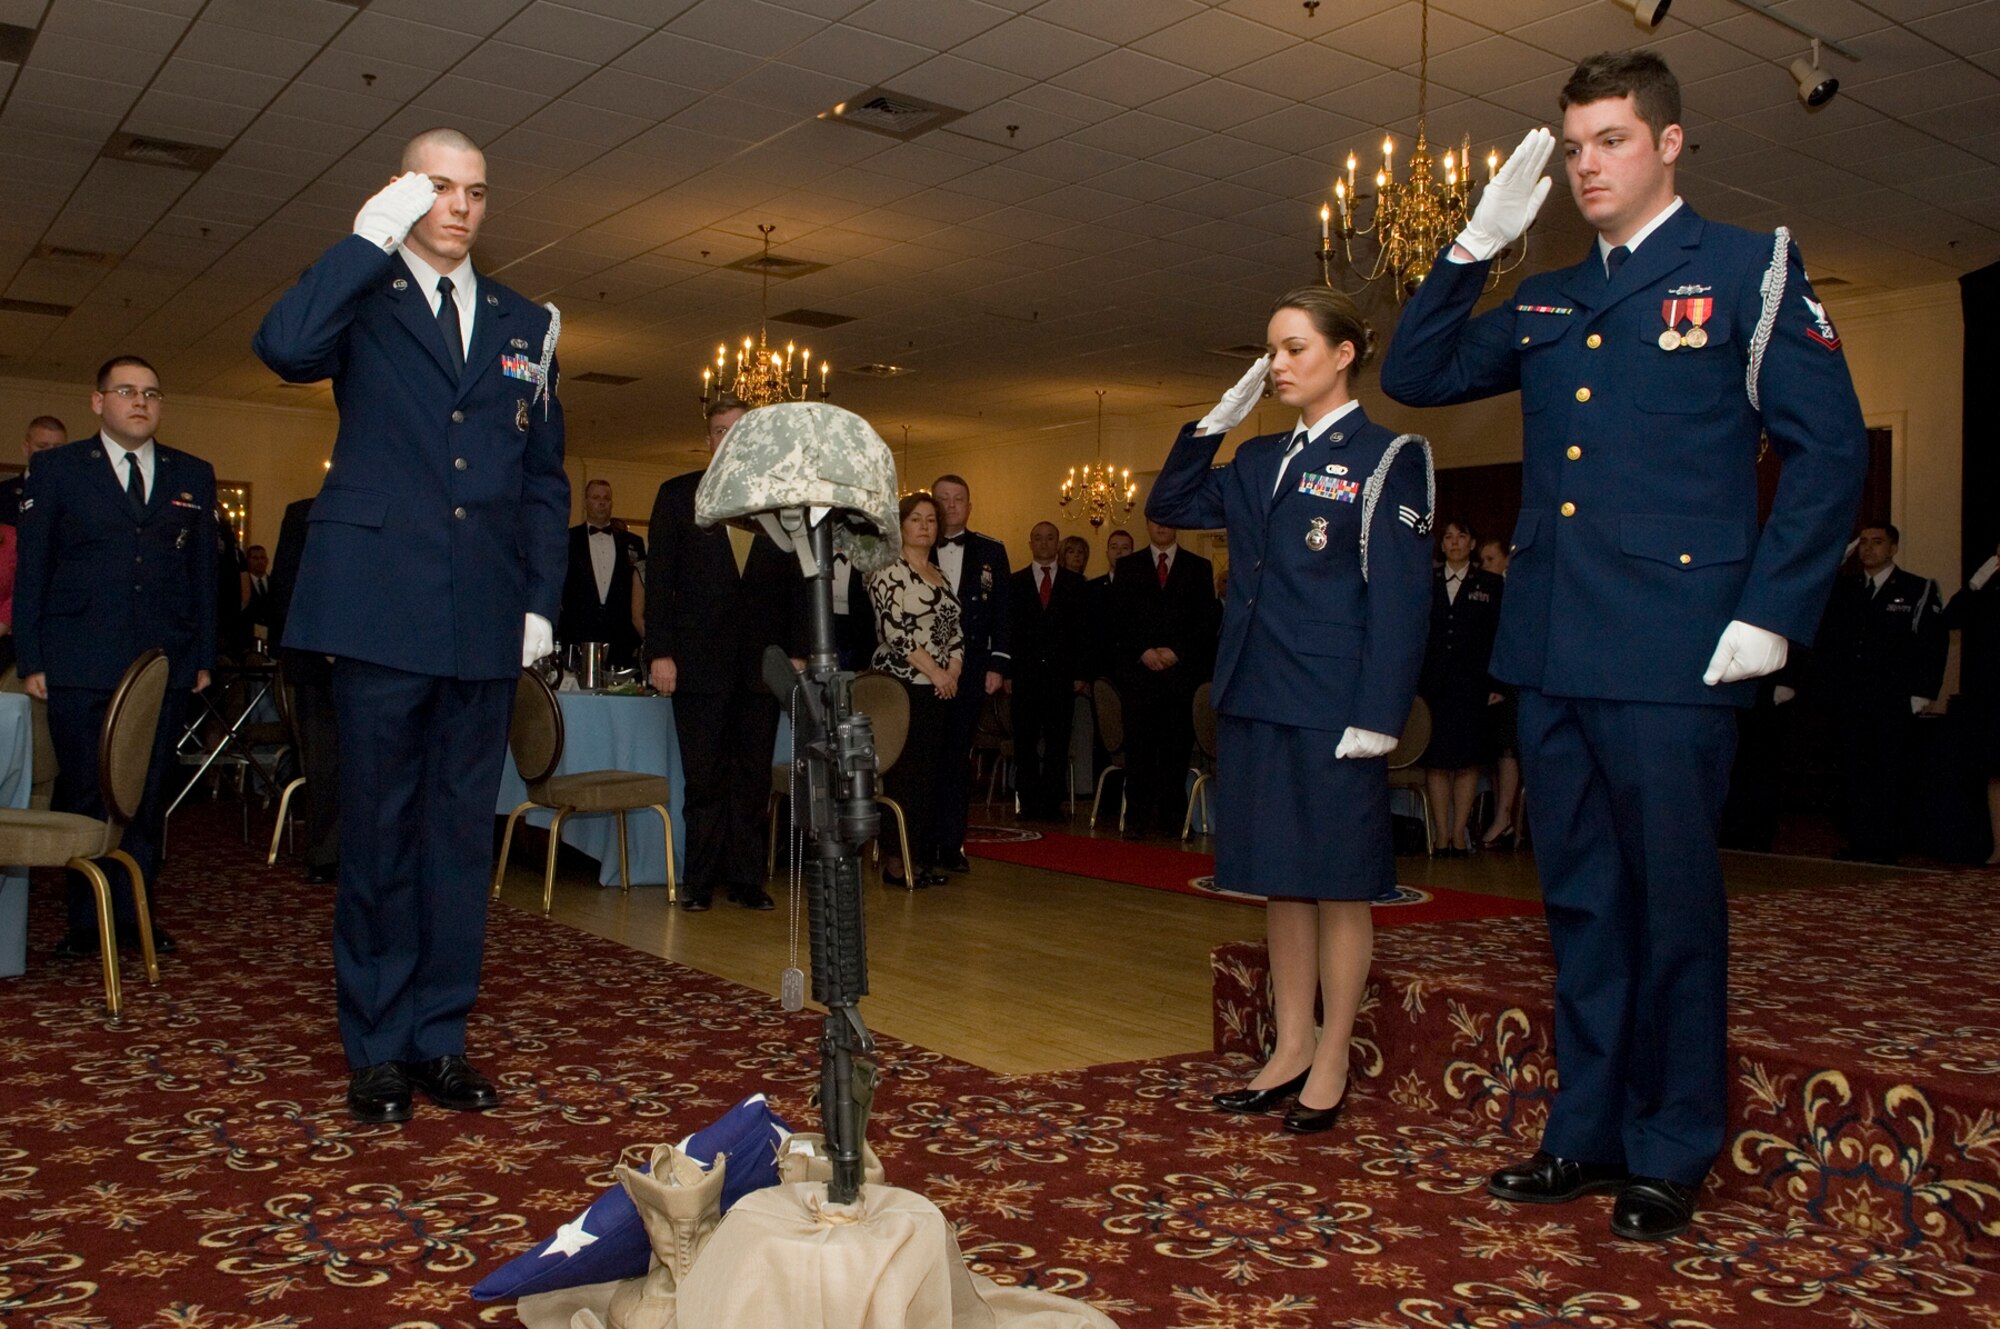 HANSCOM AIR FORCE BASE, Mass. – Airman Leadership School students pay a solemn tribute to fallen military members during the ALS graduation ceremony at the Minuteman Club on March 27.   (U.S. Air Force photo by Mark Wyatt)